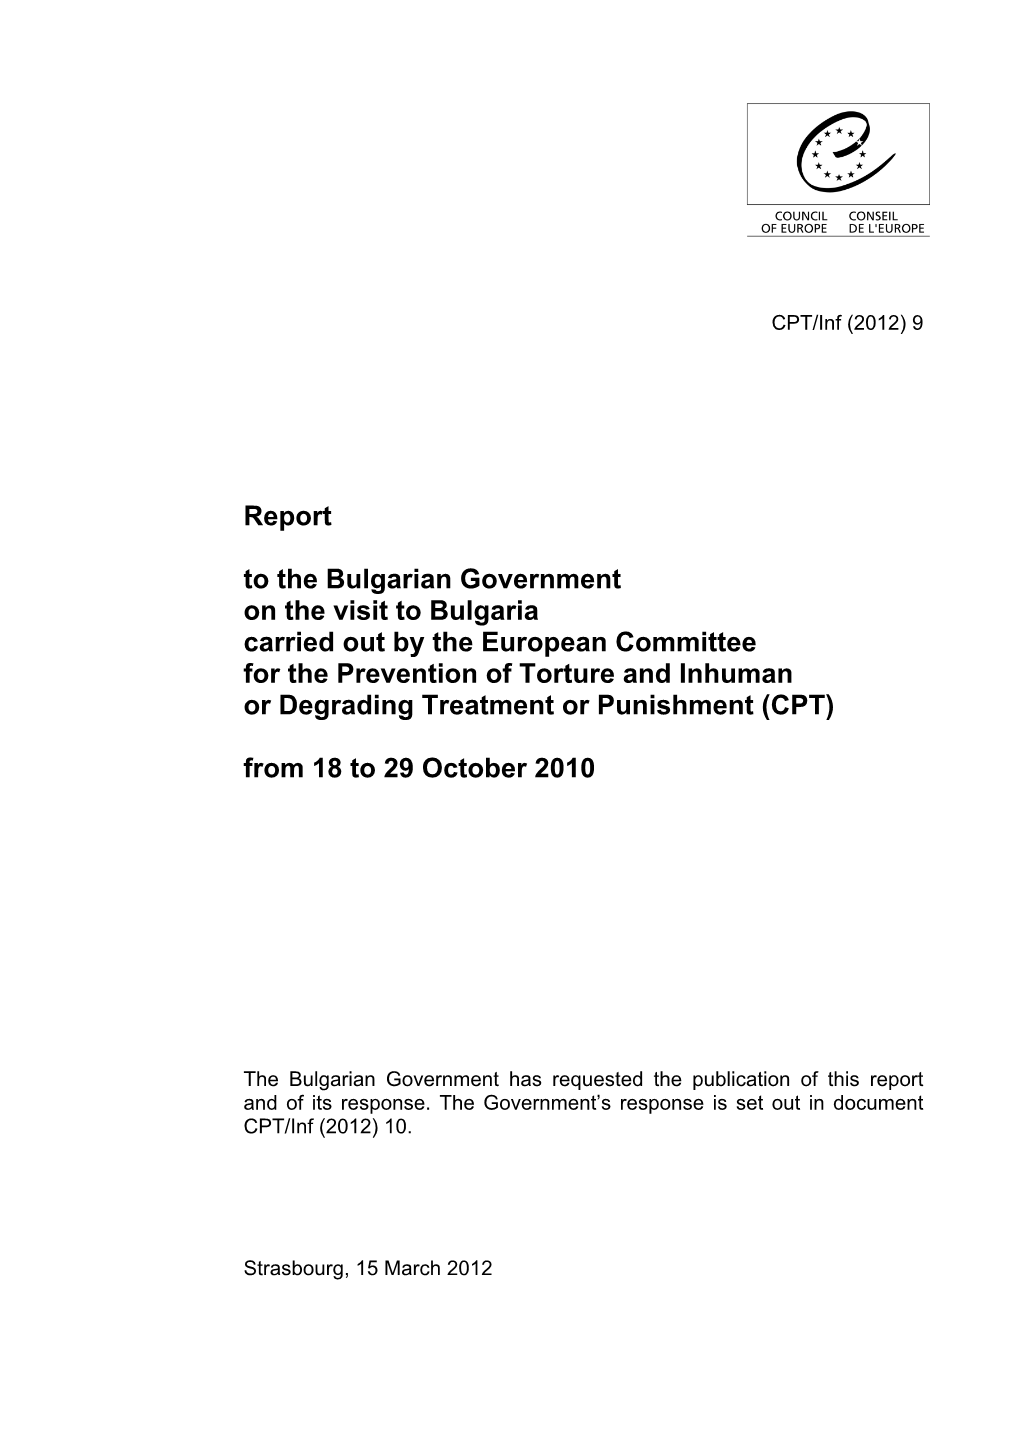 Report to the Bulgarian Government on the Visit to Bulgaria Carried Out